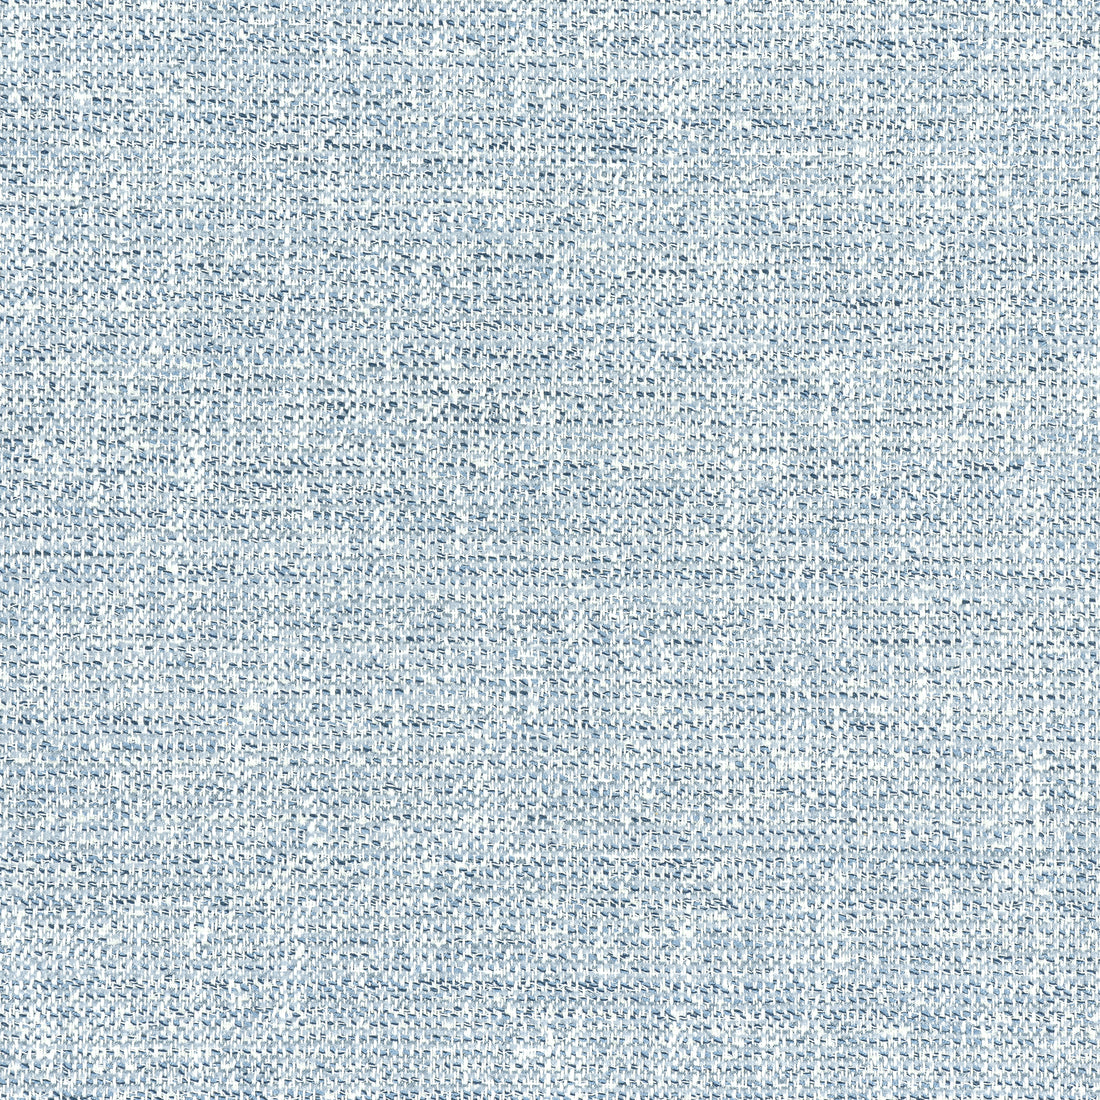 Calais fabric in sky color - pattern number W8801 - by Thibaut in the Haven Textures collection